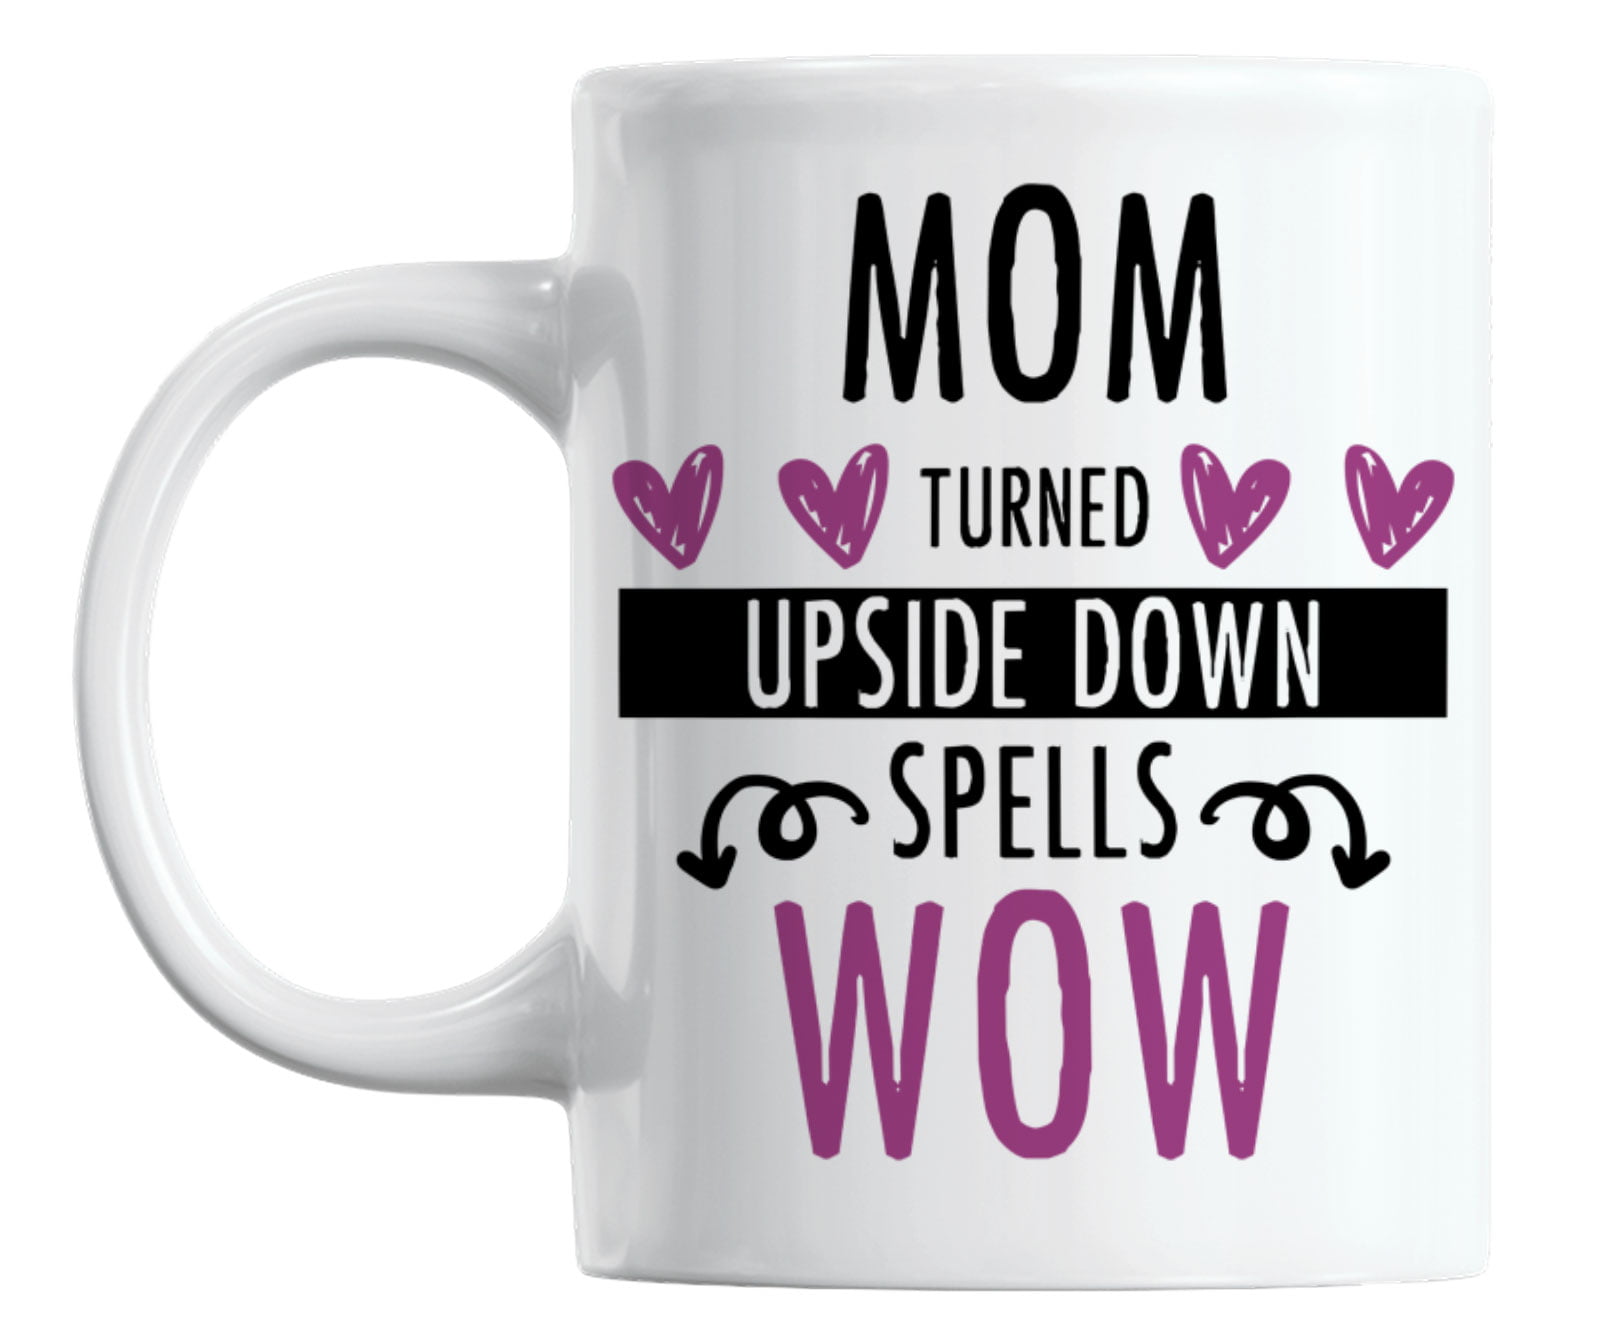 Wow Mom, Mom Leggings, Mom Turned Upside Down is Wow, Mom Gift, Custom  Leggings, Mom Sayings, Mom Quote, Clothes With Mom Saying, Yoga Pants -   Canada